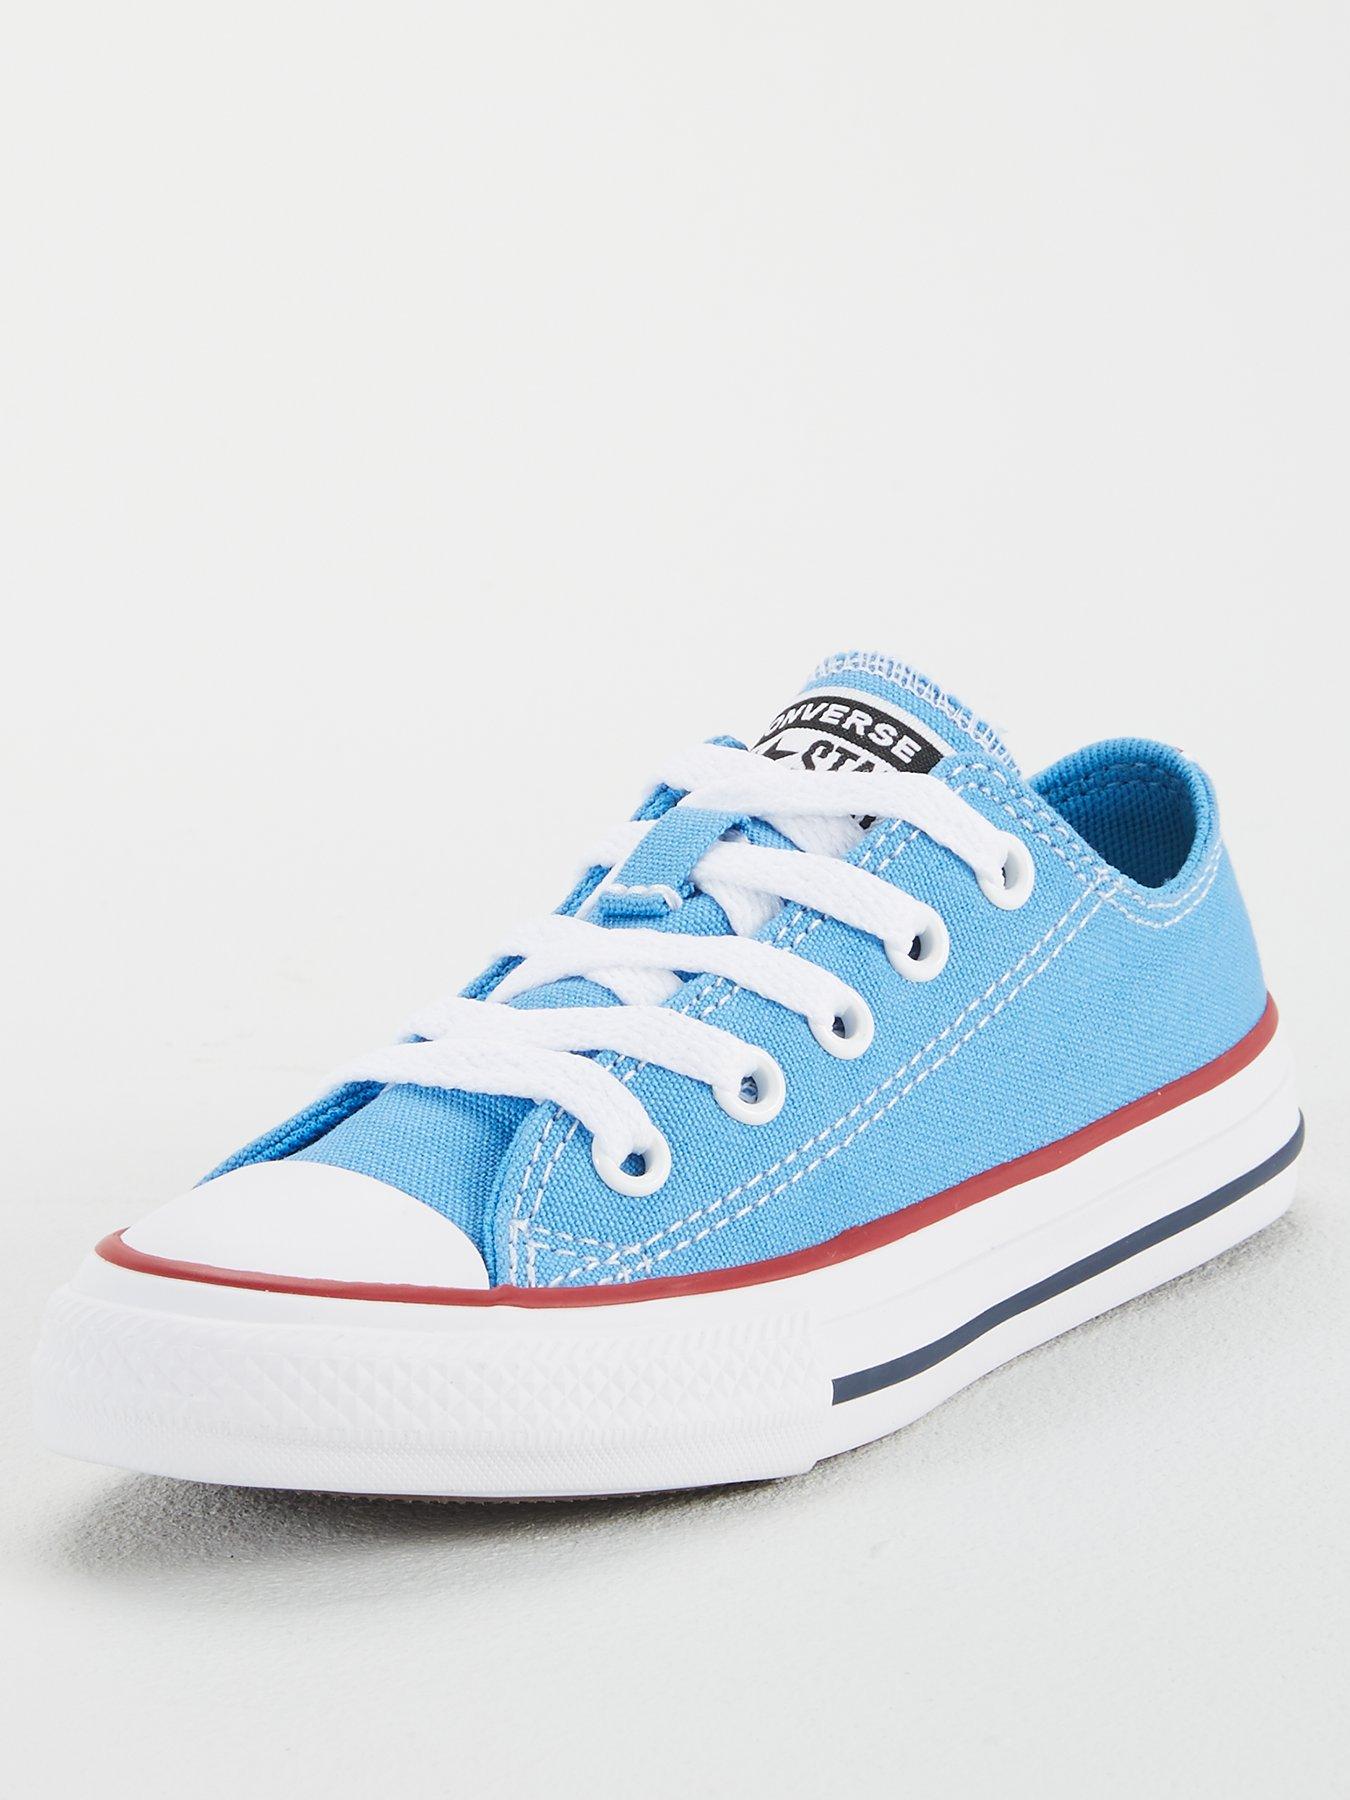 converse childrens trainers